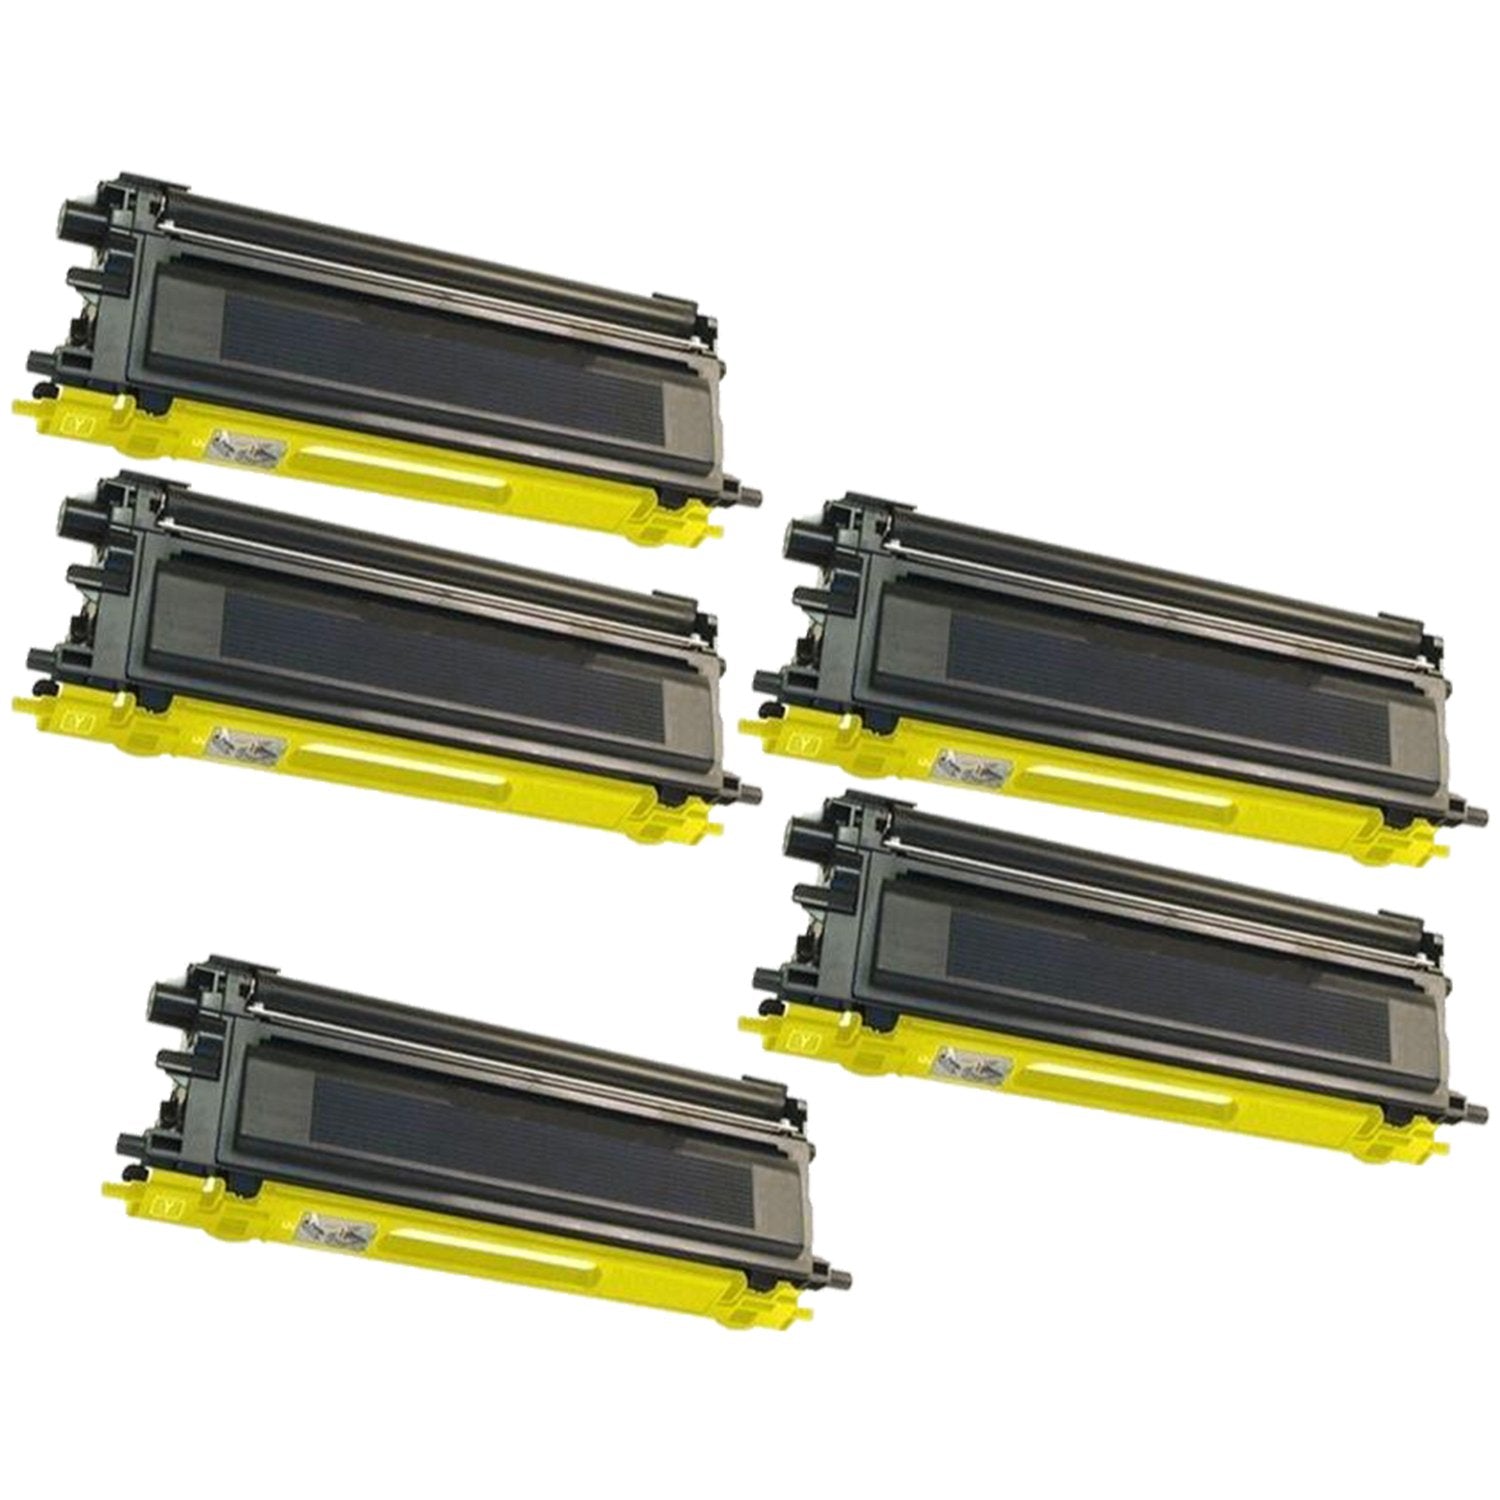 Absolute Toner Compatible Brother TN115 High Yield Toner Cartridge Yellow | Absolute Toner Brother Toner Cartridges